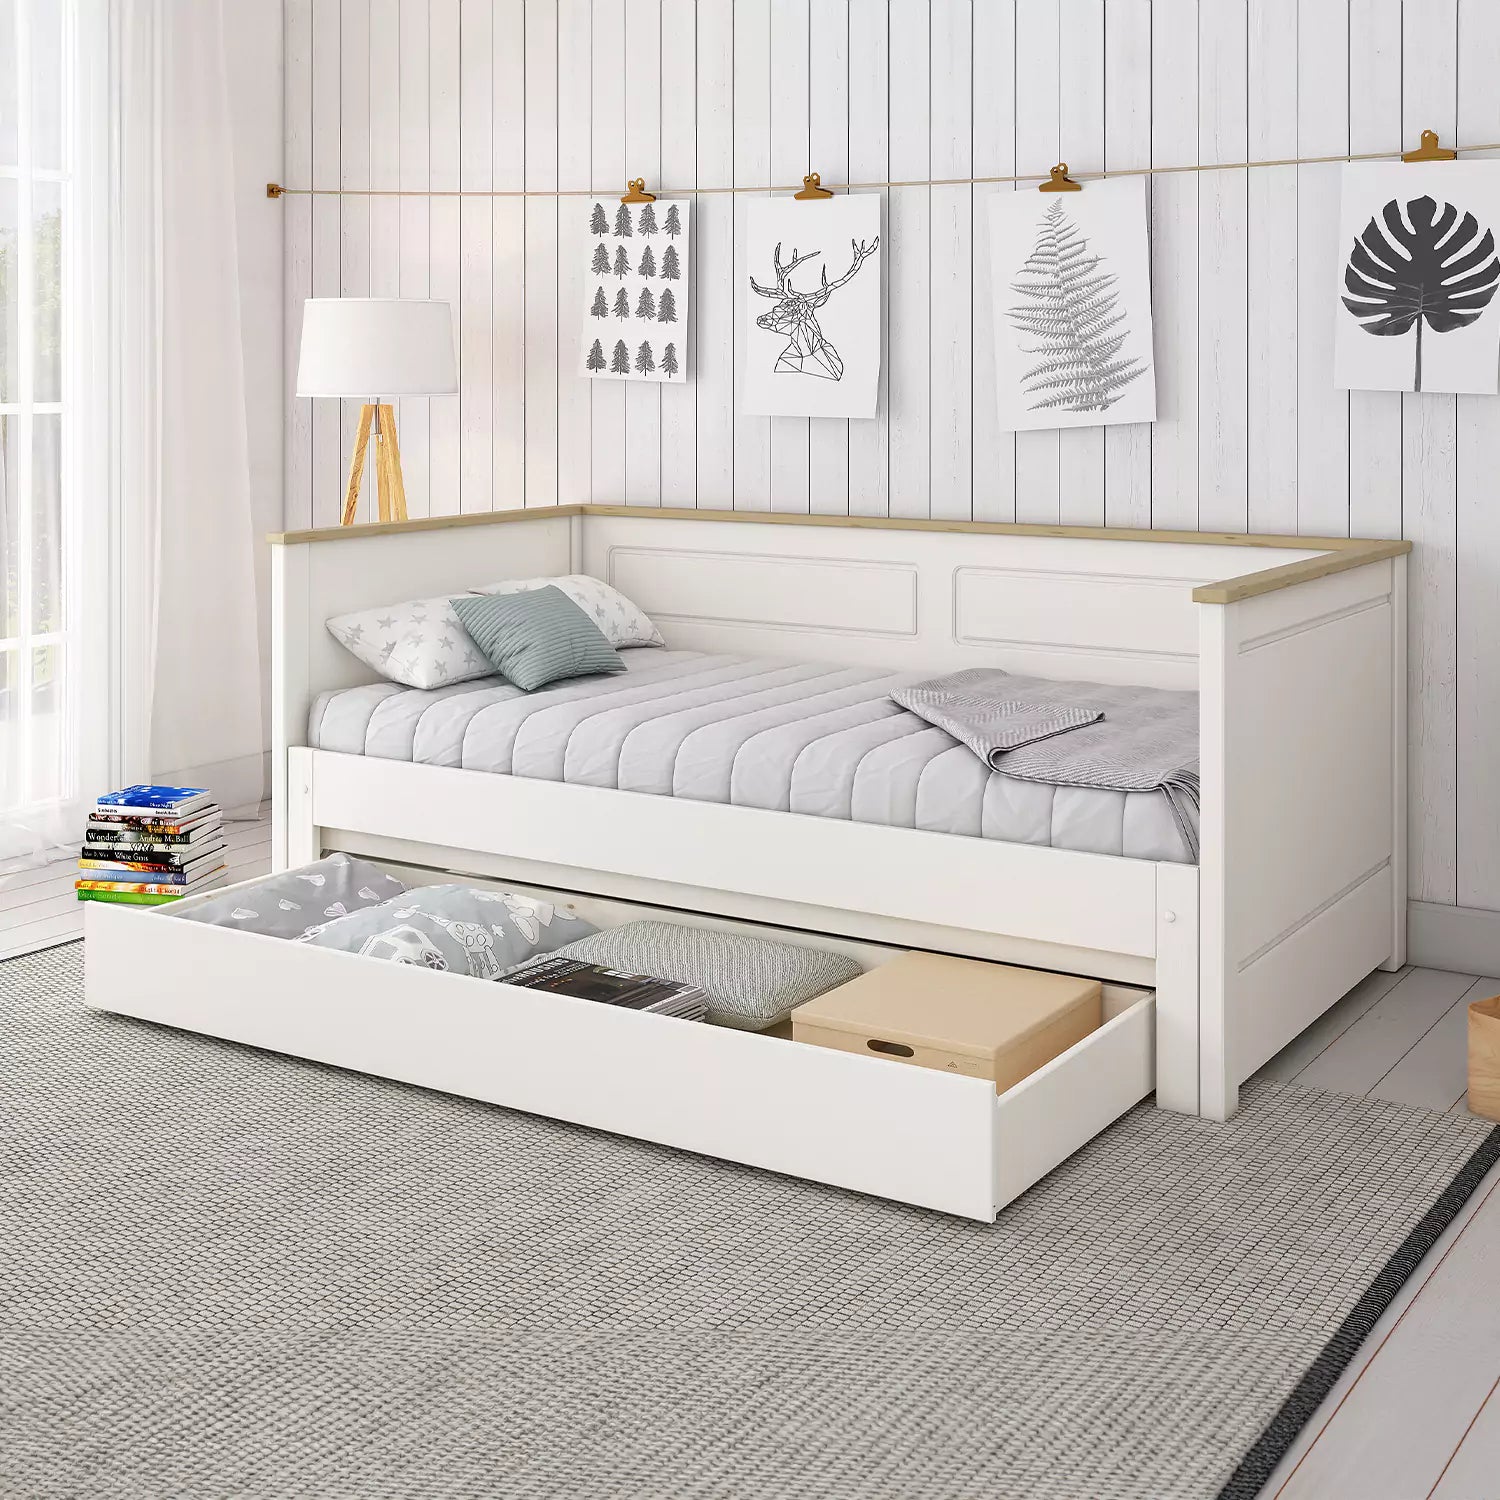 An image of Heritage Extending Day Bed with Drawer - White & Oak